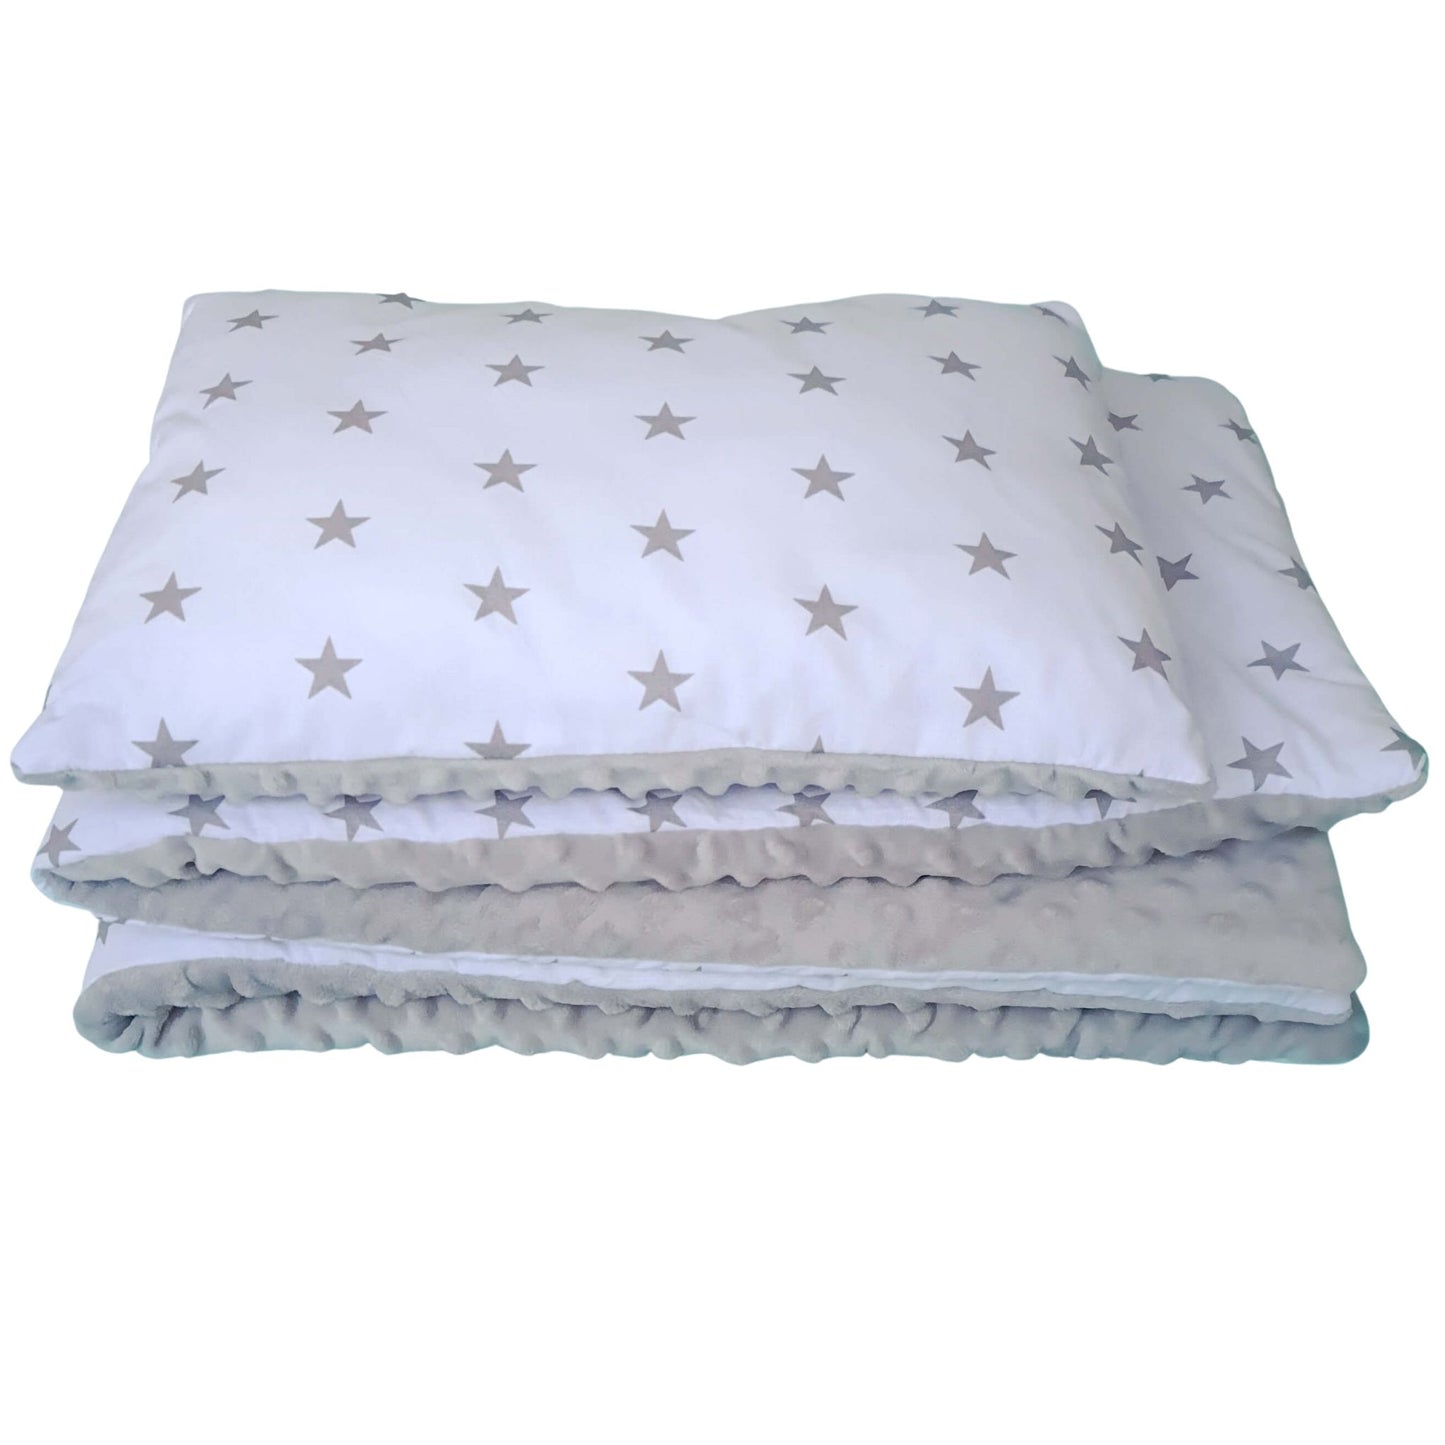 blanket and pillow for baby crib white cotton grey stars pattern and grey cosy fleece